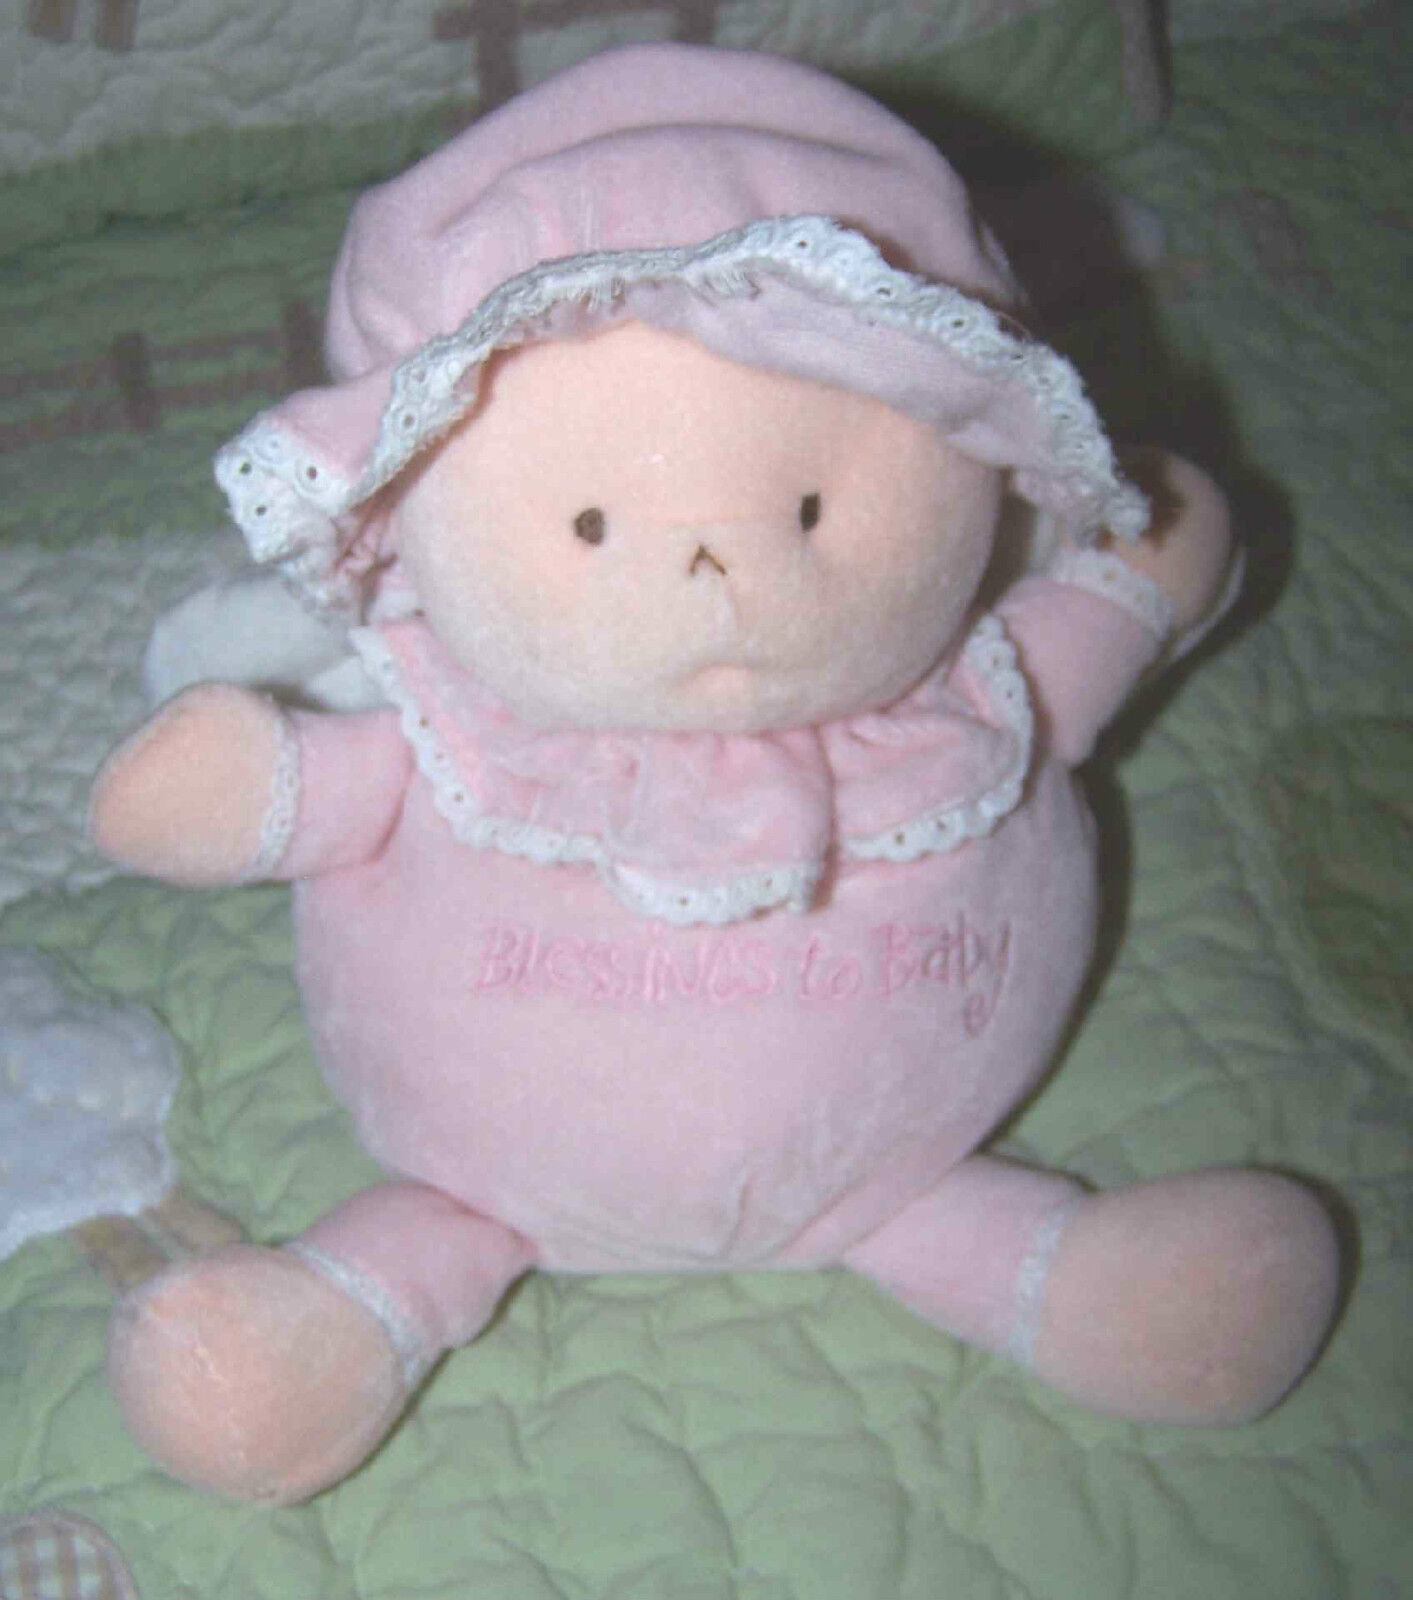 Ty Love Blessings To Baby Baby Girl Doll Toy 2004 Stuffed Plush Pink  Euc